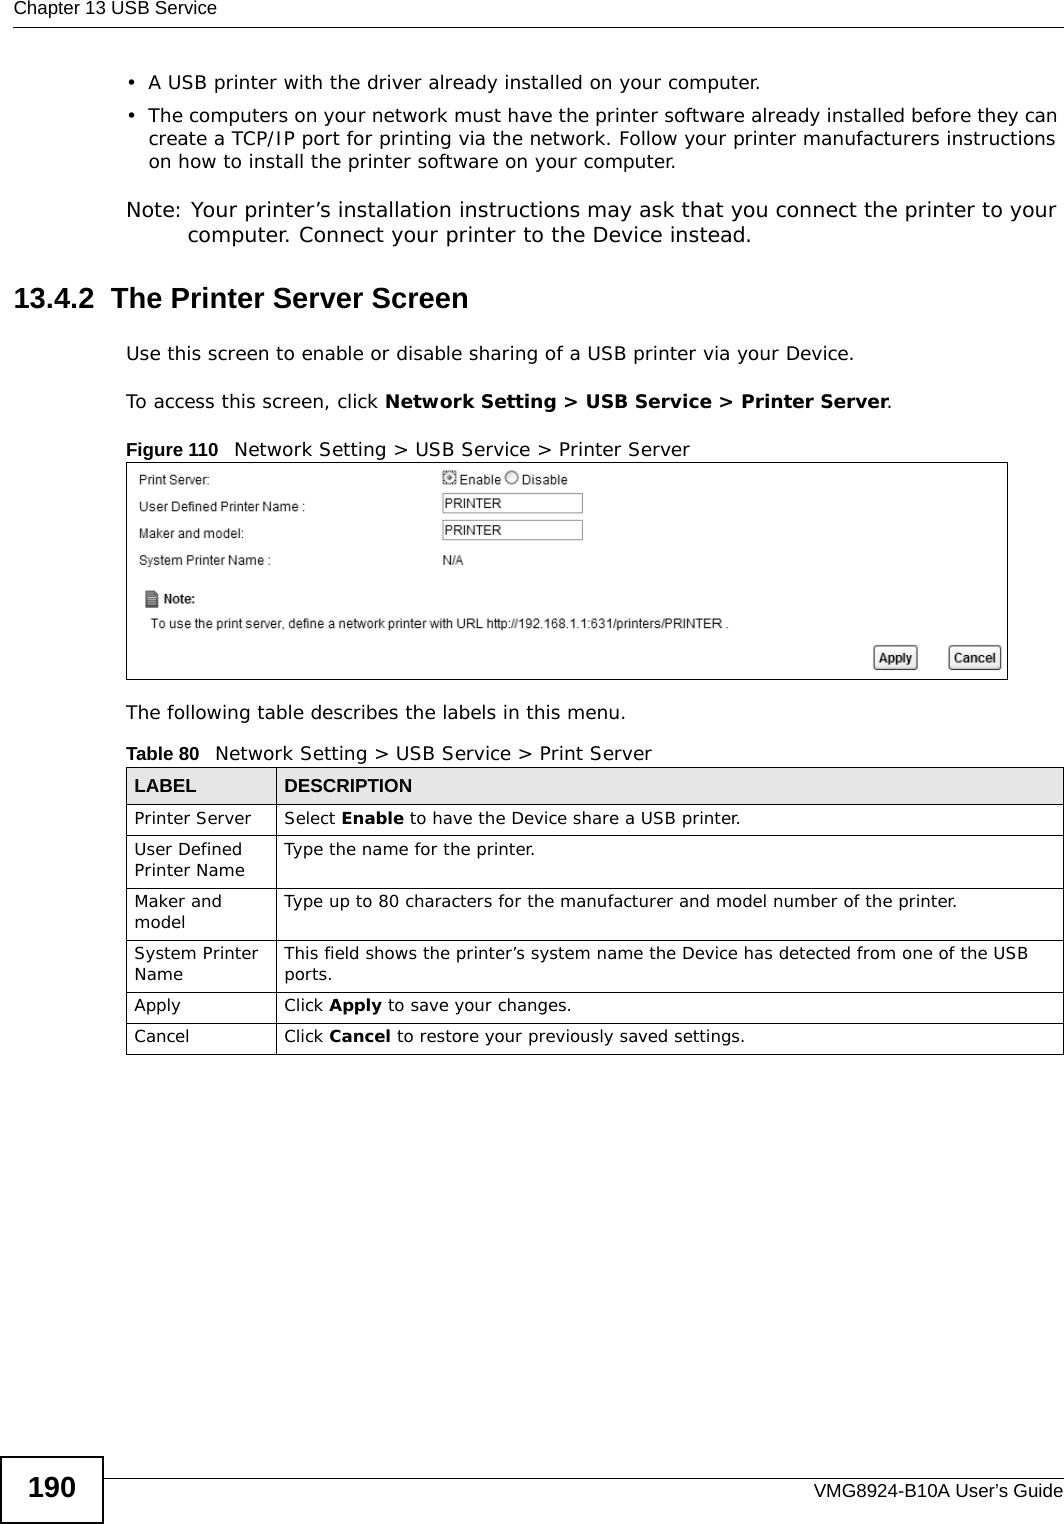 Chapter 13 USB ServiceVMG8924-B10A User’s Guide190• A USB printer with the driver already installed on your computer.• The computers on your network must have the printer software already installed before they can create a TCP/IP port for printing via the network. Follow your printer manufacturers instructions on how to install the printer software on your computer. Note: Your printer’s installation instructions may ask that you connect the printer to your computer. Connect your printer to the Device instead.13.4.2  The Printer Server ScreenUse this screen to enable or disable sharing of a USB printer via your Device. To access this screen, click Network Setting &gt; USB Service &gt; Printer Server.Figure 110   Network Setting &gt; USB Service &gt; Printer ServerThe following table describes the labels in this menu.Table 80   Network Setting &gt; USB Service &gt; Print ServerLABEL DESCRIPTIONPrinter Server  Select Enable to have the Device share a USB printer.User Defined Printer Name Type the name for the printer.Maker and model Type up to 80 characters for the manufacturer and model number of the printer.System Printer Name This field shows the printer’s system name the Device has detected from one of the USB ports.Apply Click Apply to save your changes.Cancel Click Cancel to restore your previously saved settings.